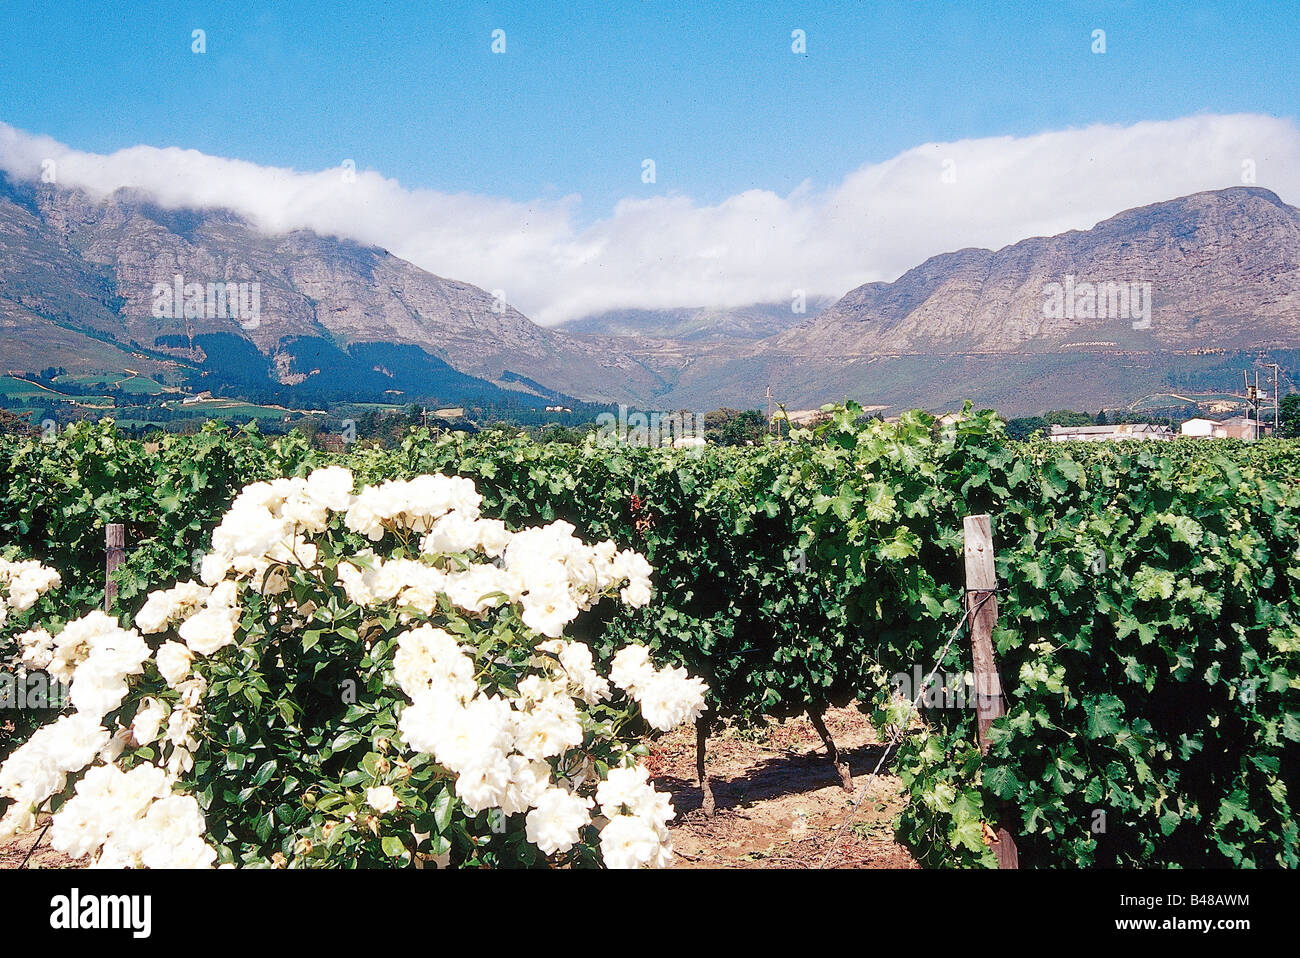 geography / travel, South Africa, agriculture / farming, wine, wine-growing estate 'Augusta', Franschhoek, wine-growing district, Additional-Rights-Clearance-Info-Not-Available Stock Photo